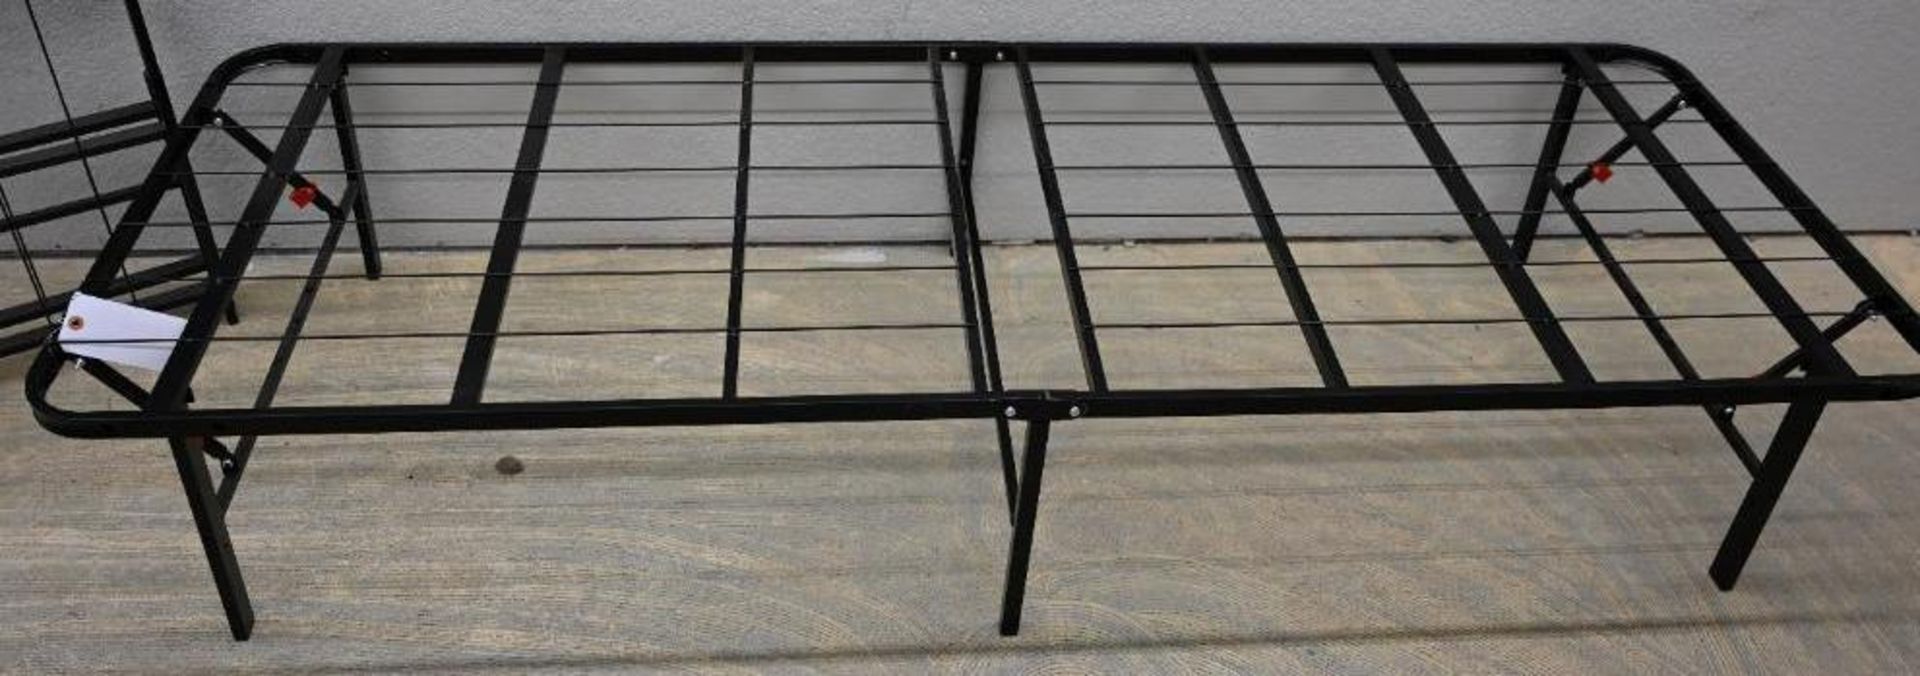 Two 28.5" x78.5" x 14" Metal Fold Up Box Springs - Image 3 of 4